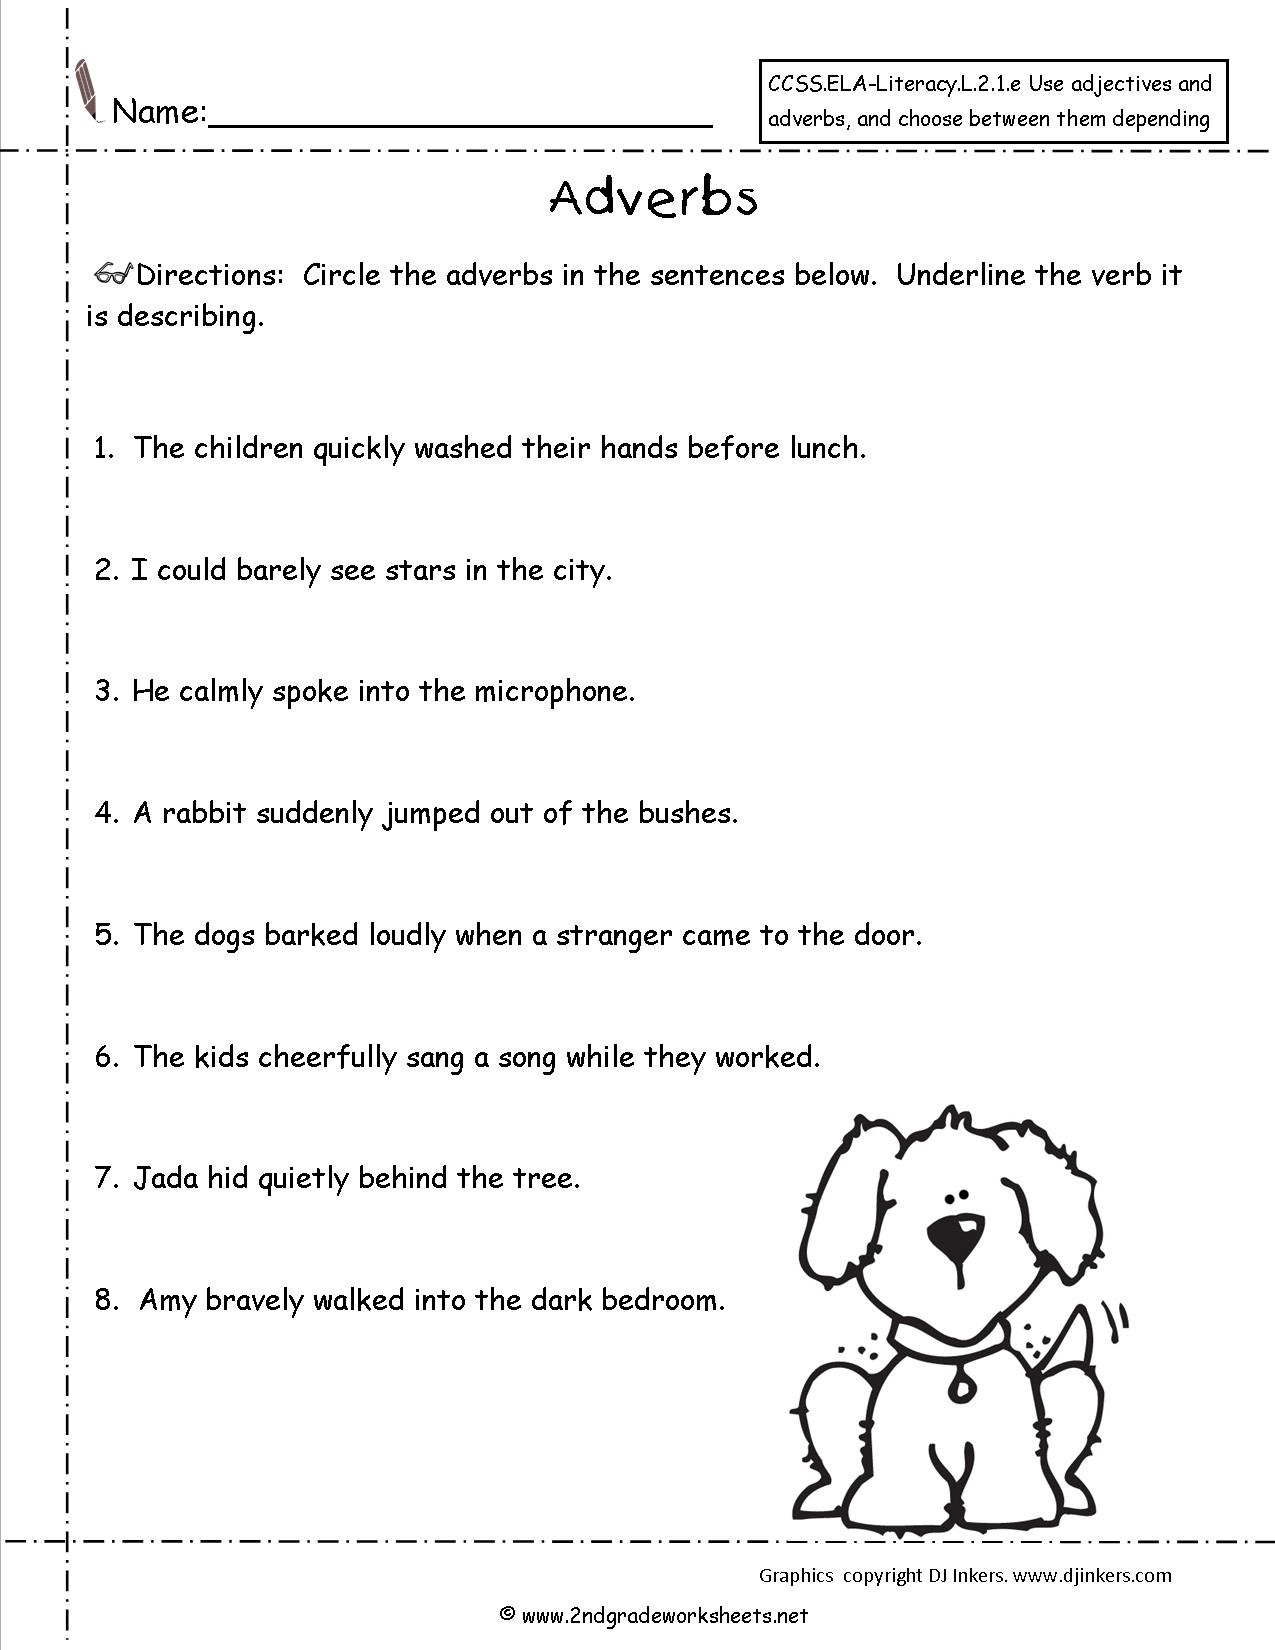 did-you-know-all-of-these-spanish-adverbs-learnspanish-adverbios-examenes-de-primaria-los